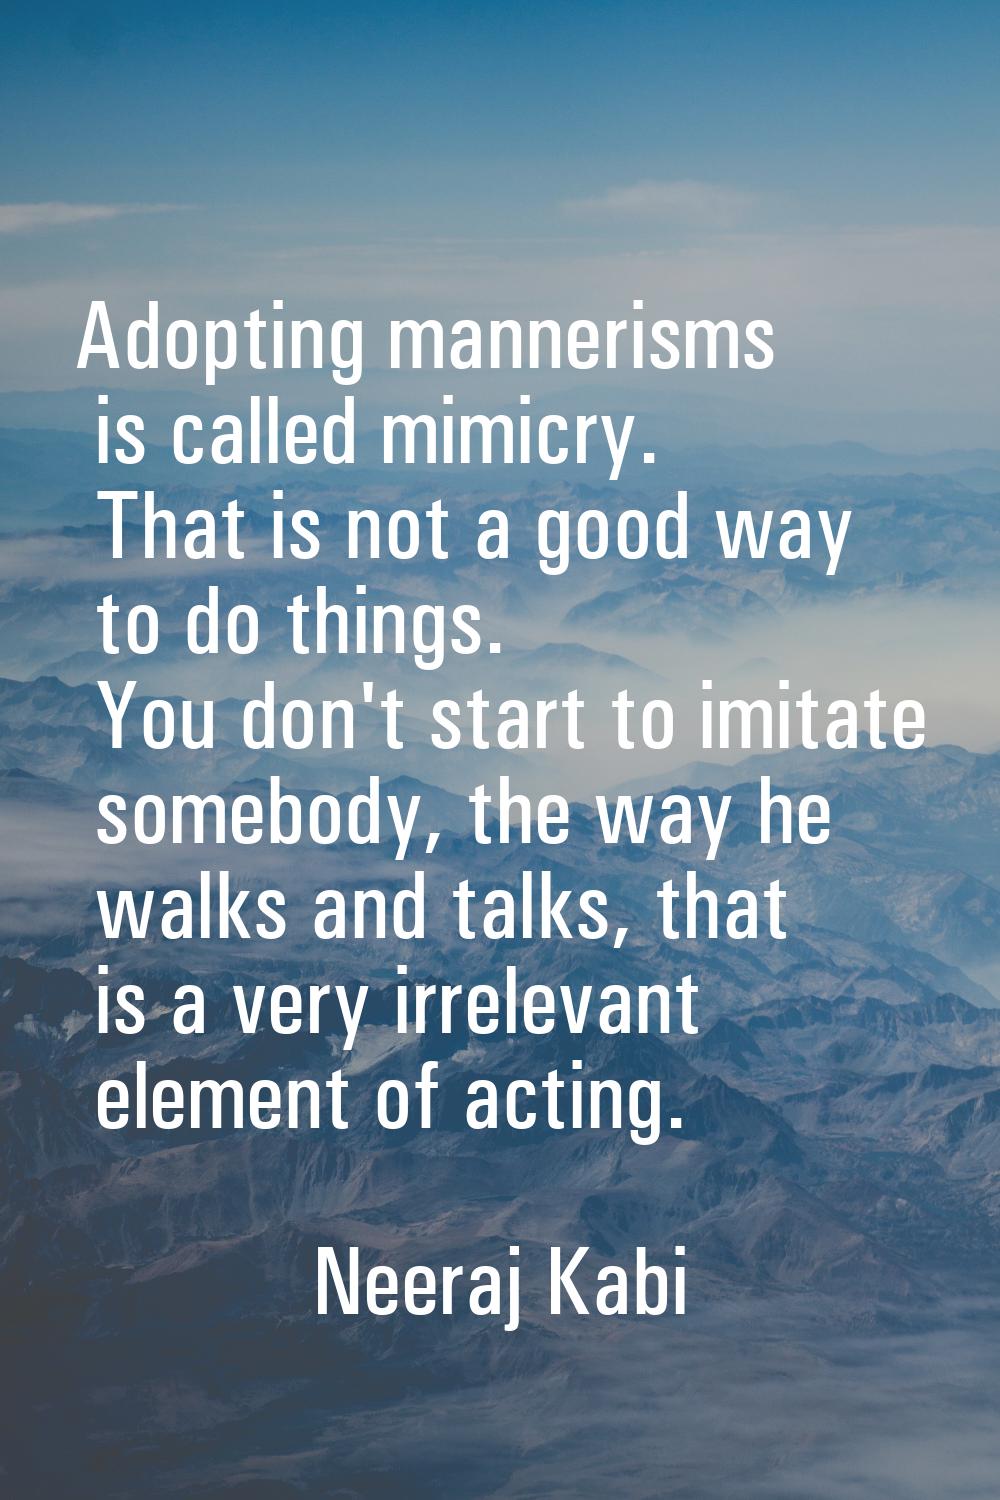 Adopting mannerisms is called mimicry. That is not a good way to do things. You don't start to imit